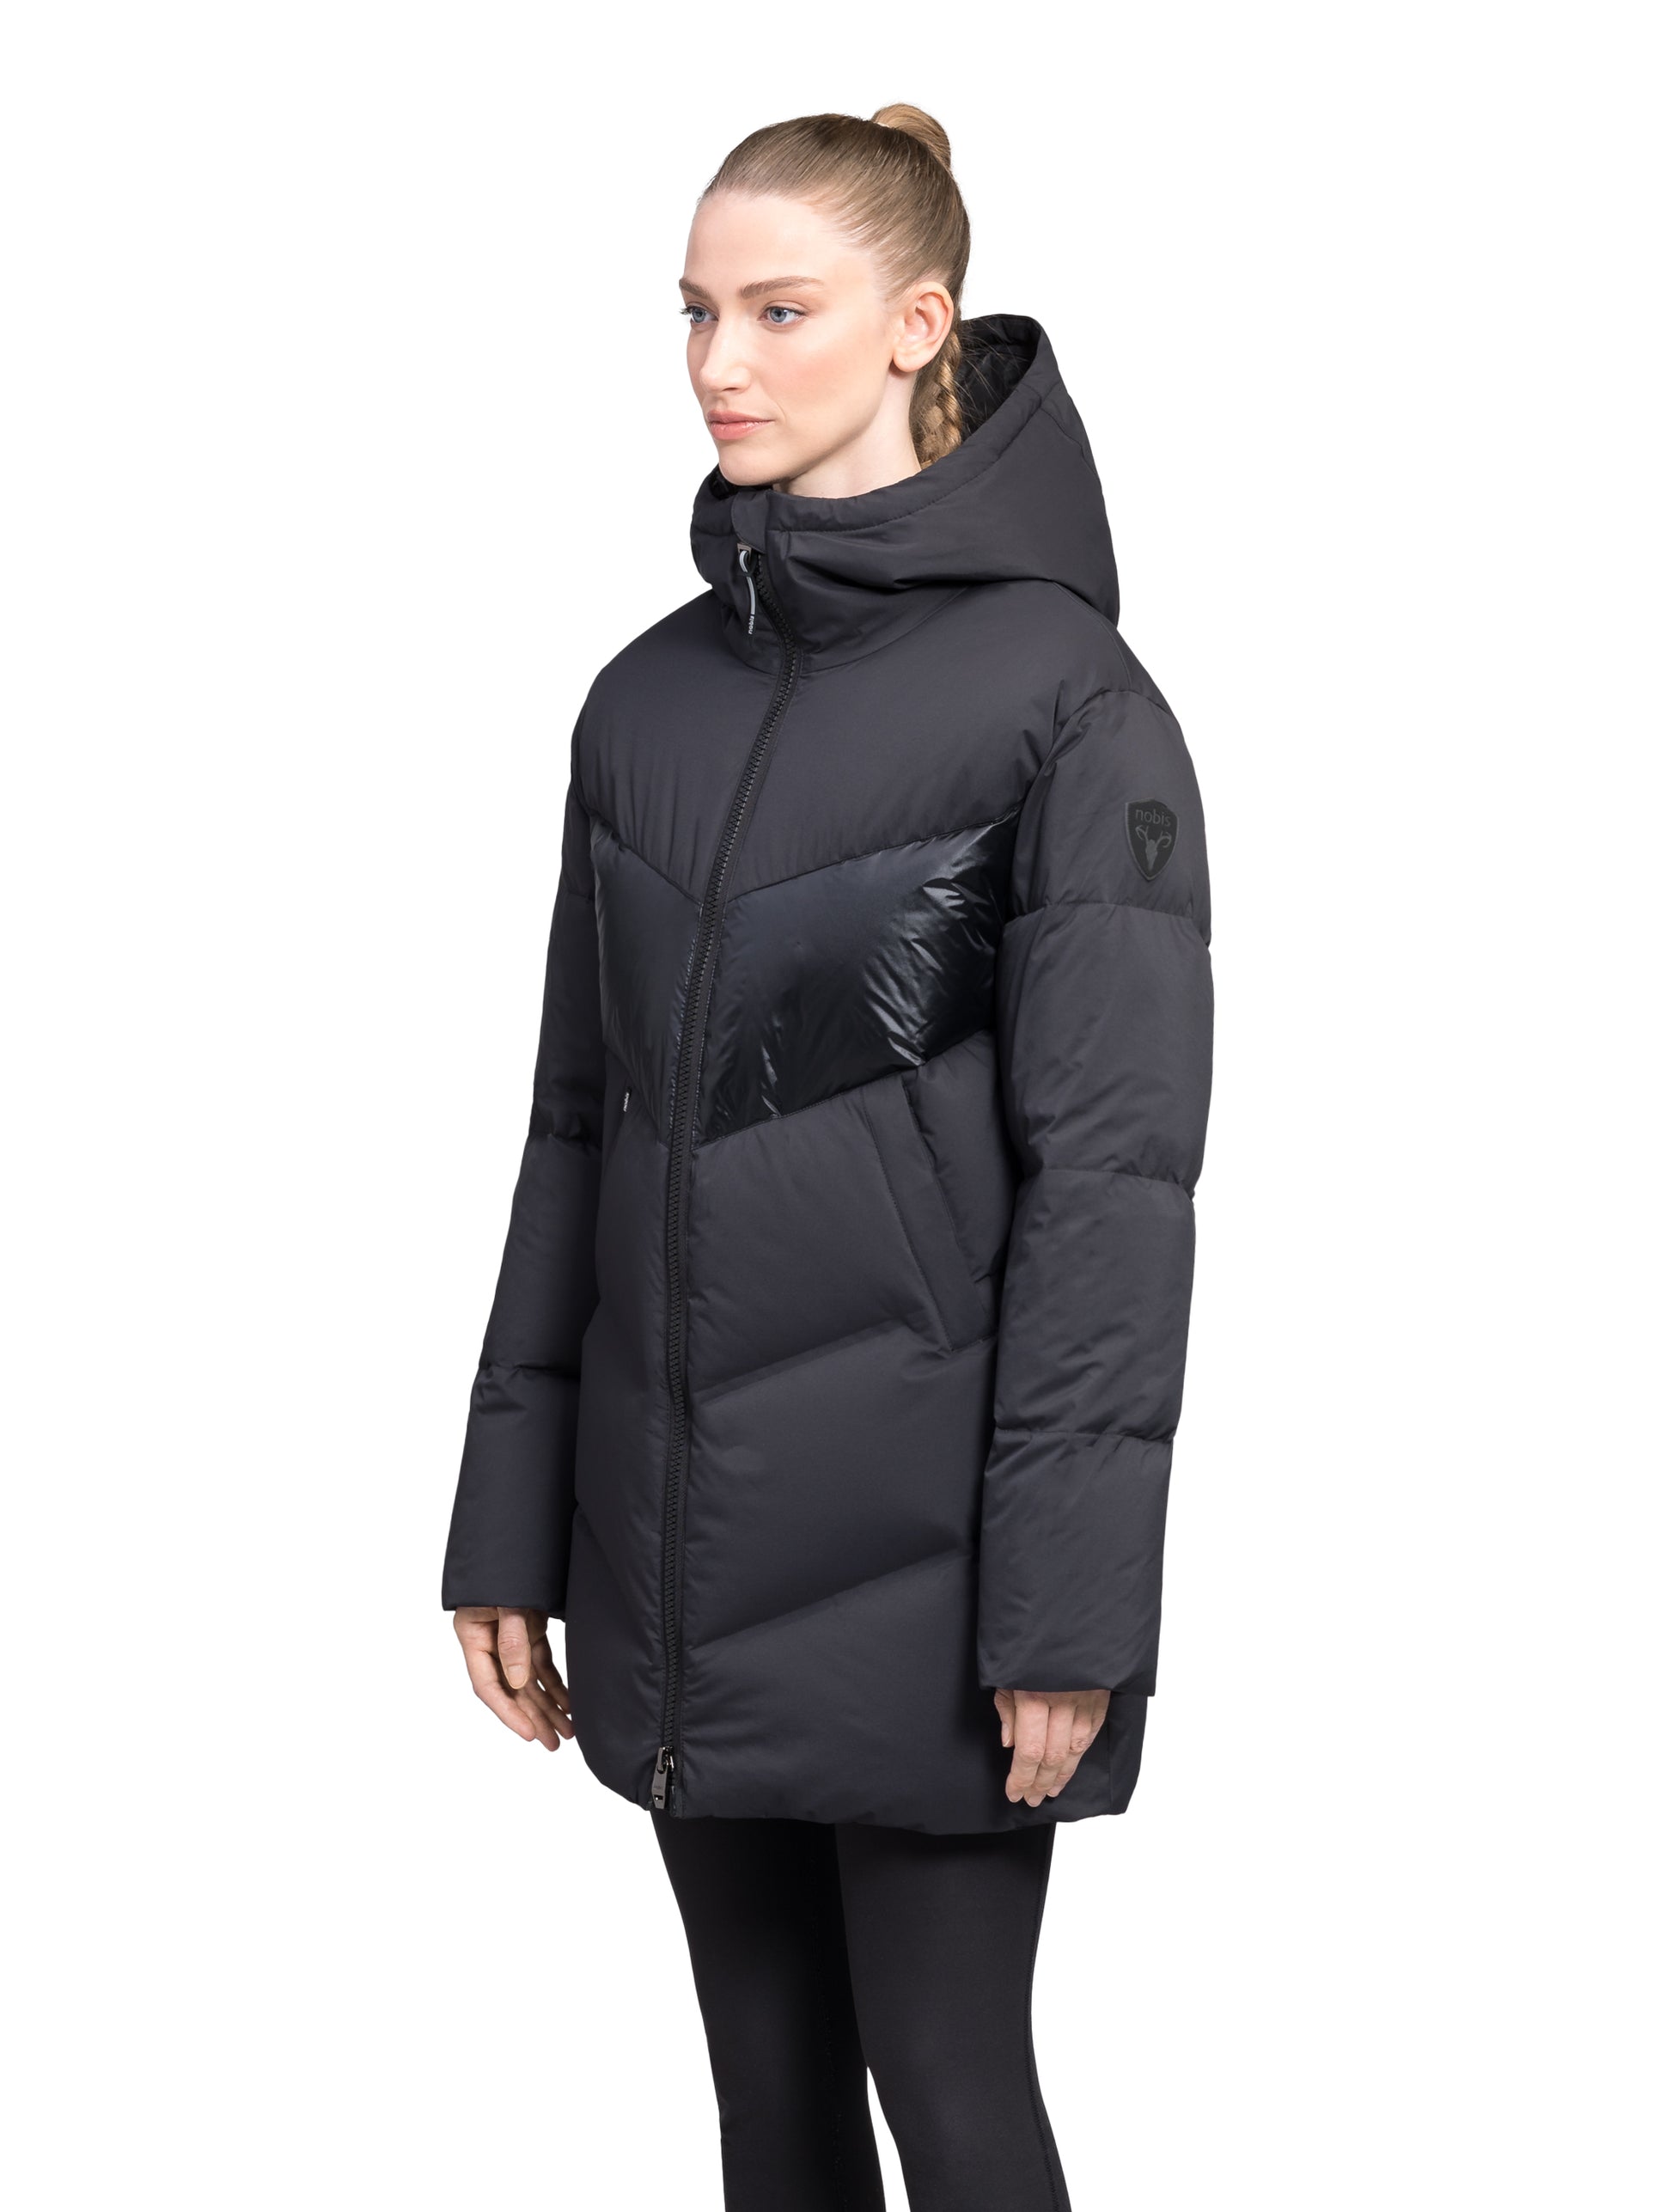 Isla Women's Chevron Quilted Puffer Jacket in thigh length, premium technical nylon taffeta fabrication, Premium Canadian origin White Duck Down insulation, non-removable down-filled hood, two-way centre-front zipper, zipper pockets at waist, contrast cire technical nylon taffeta detailing on chest and back, in Black